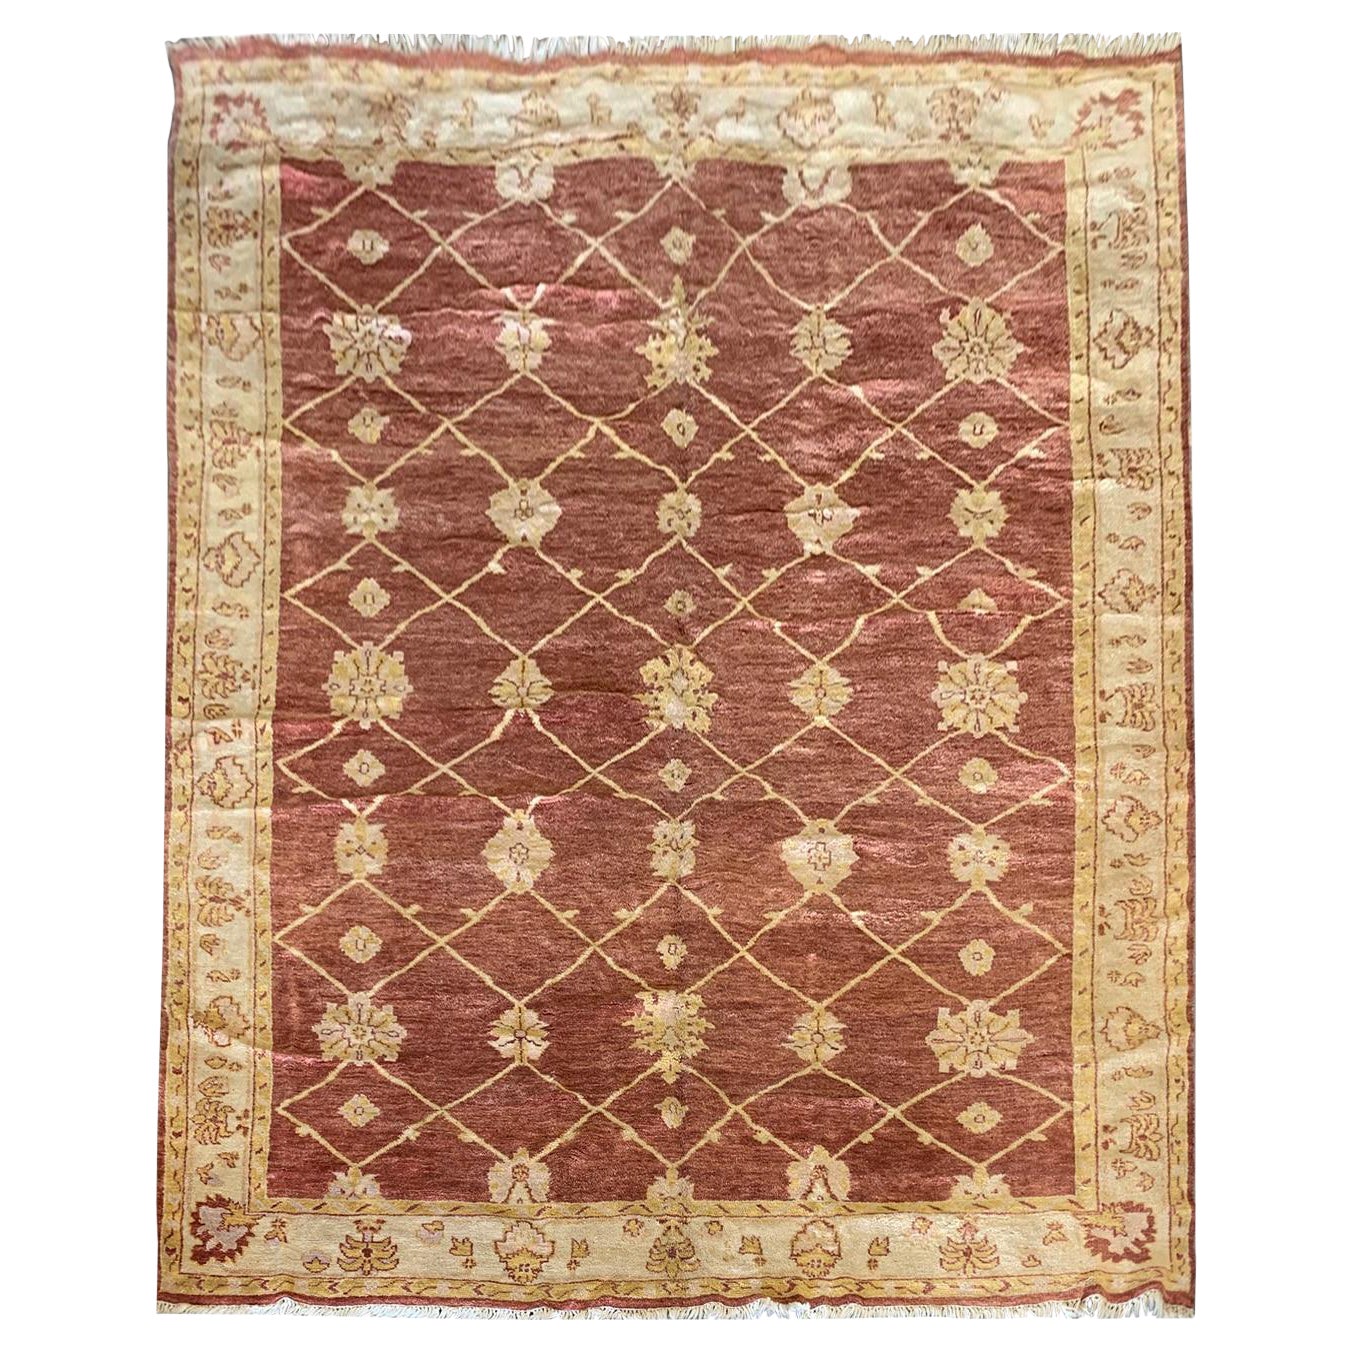 Indian Ziegler Rug, Large Red Wool Carpet For Sale